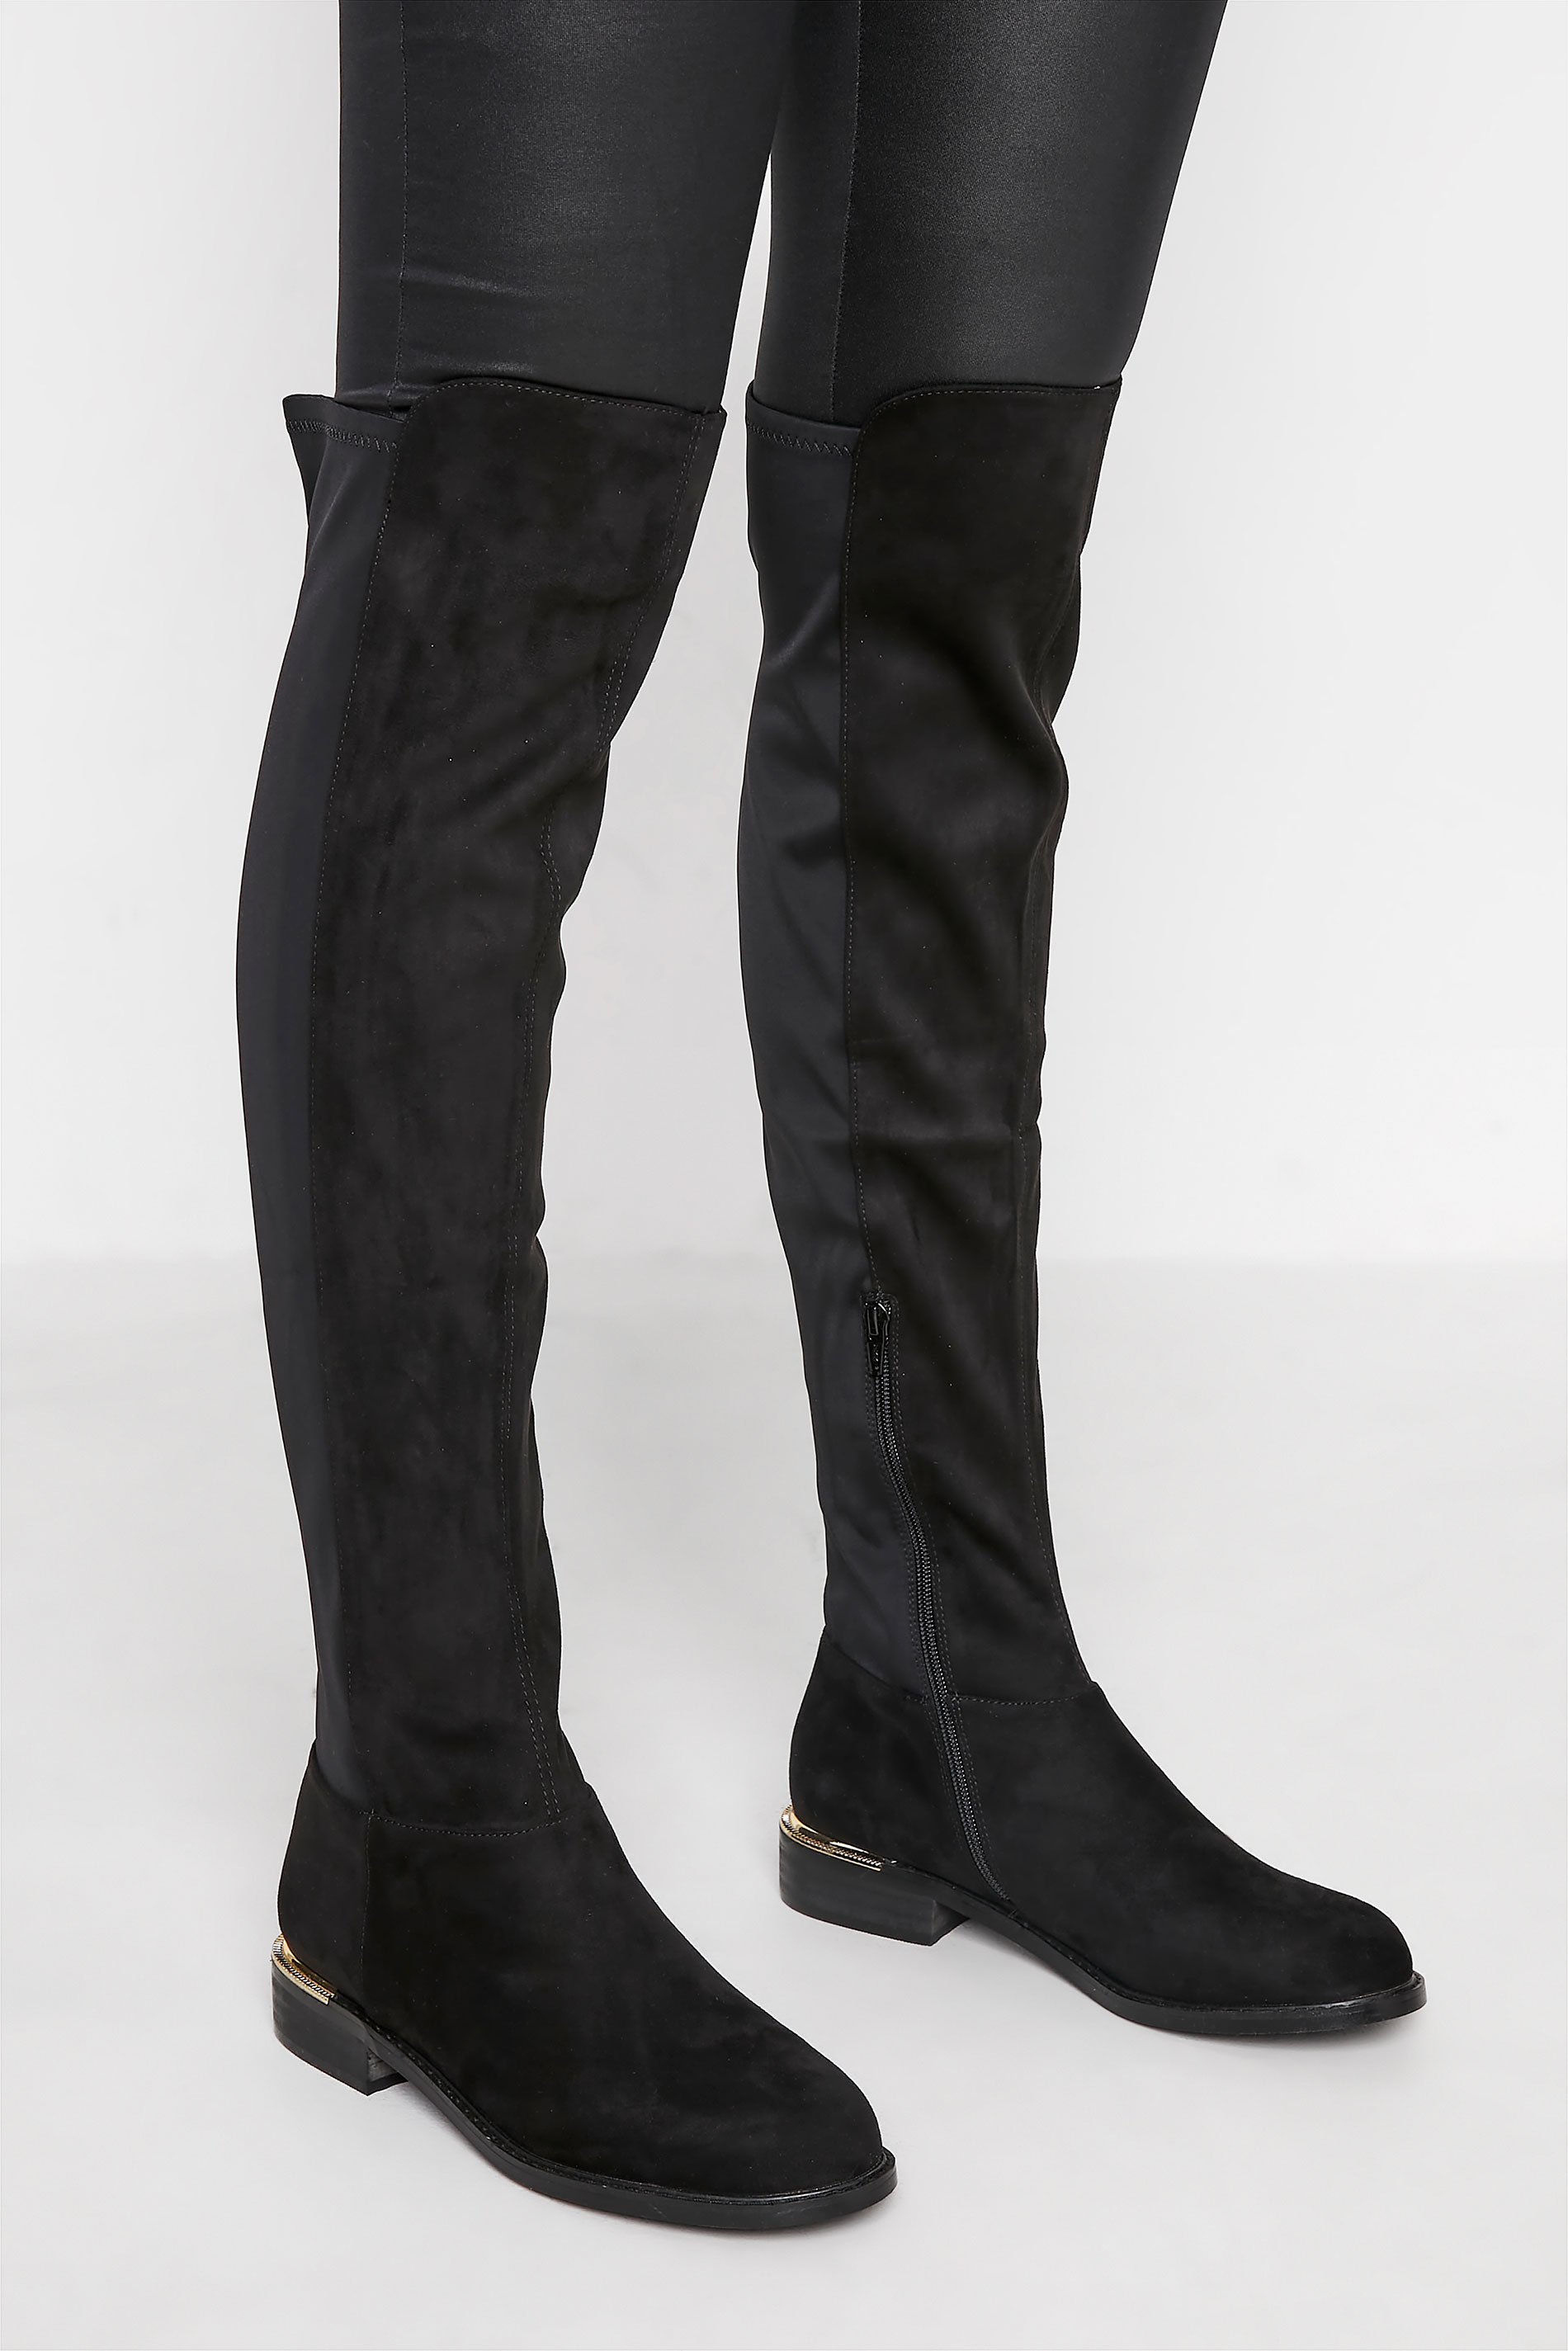 LTS Black Over The Knee Stretch Boots In Standard Fit | Long Tall Sally